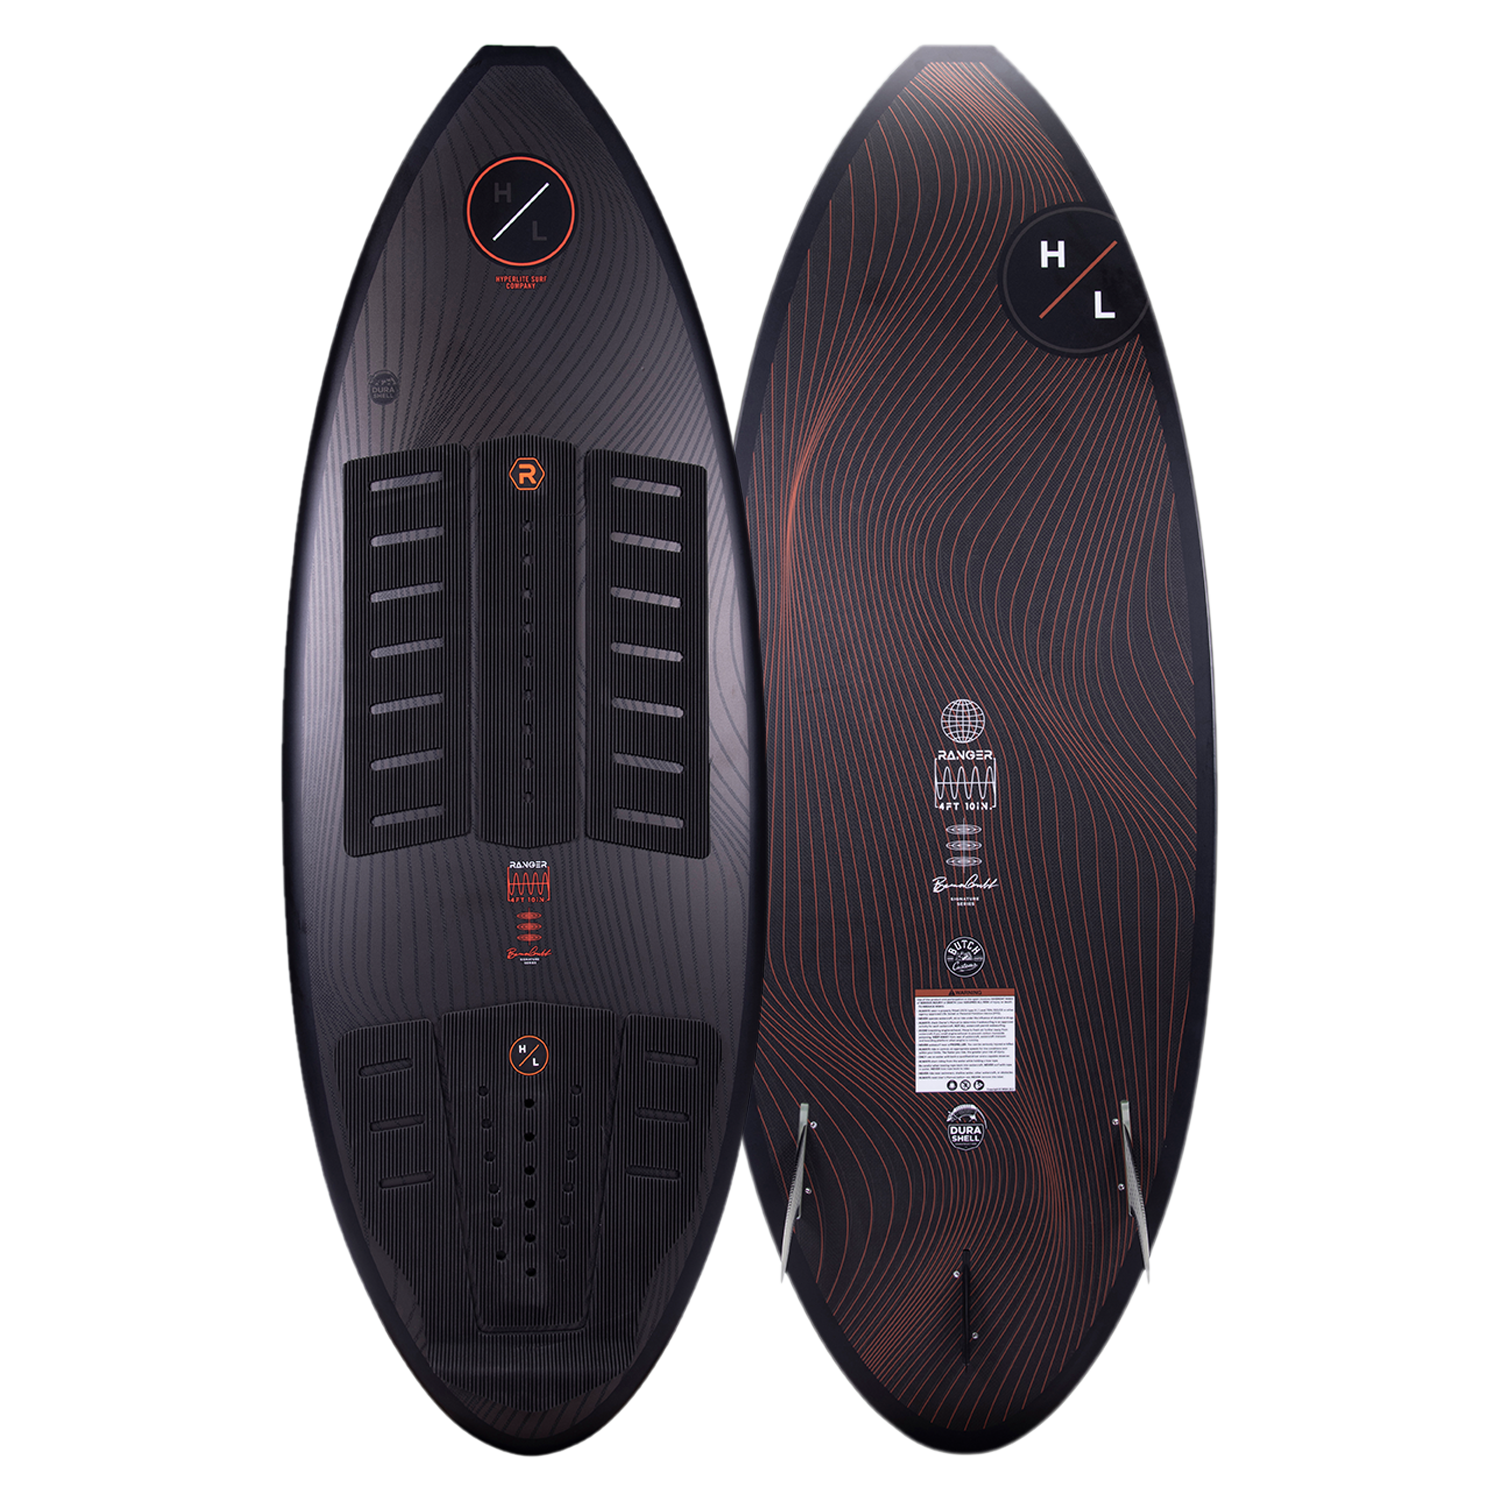 A black and brown Hyperlite 2023 Ranger Wakesurf Board with Durashell construction.